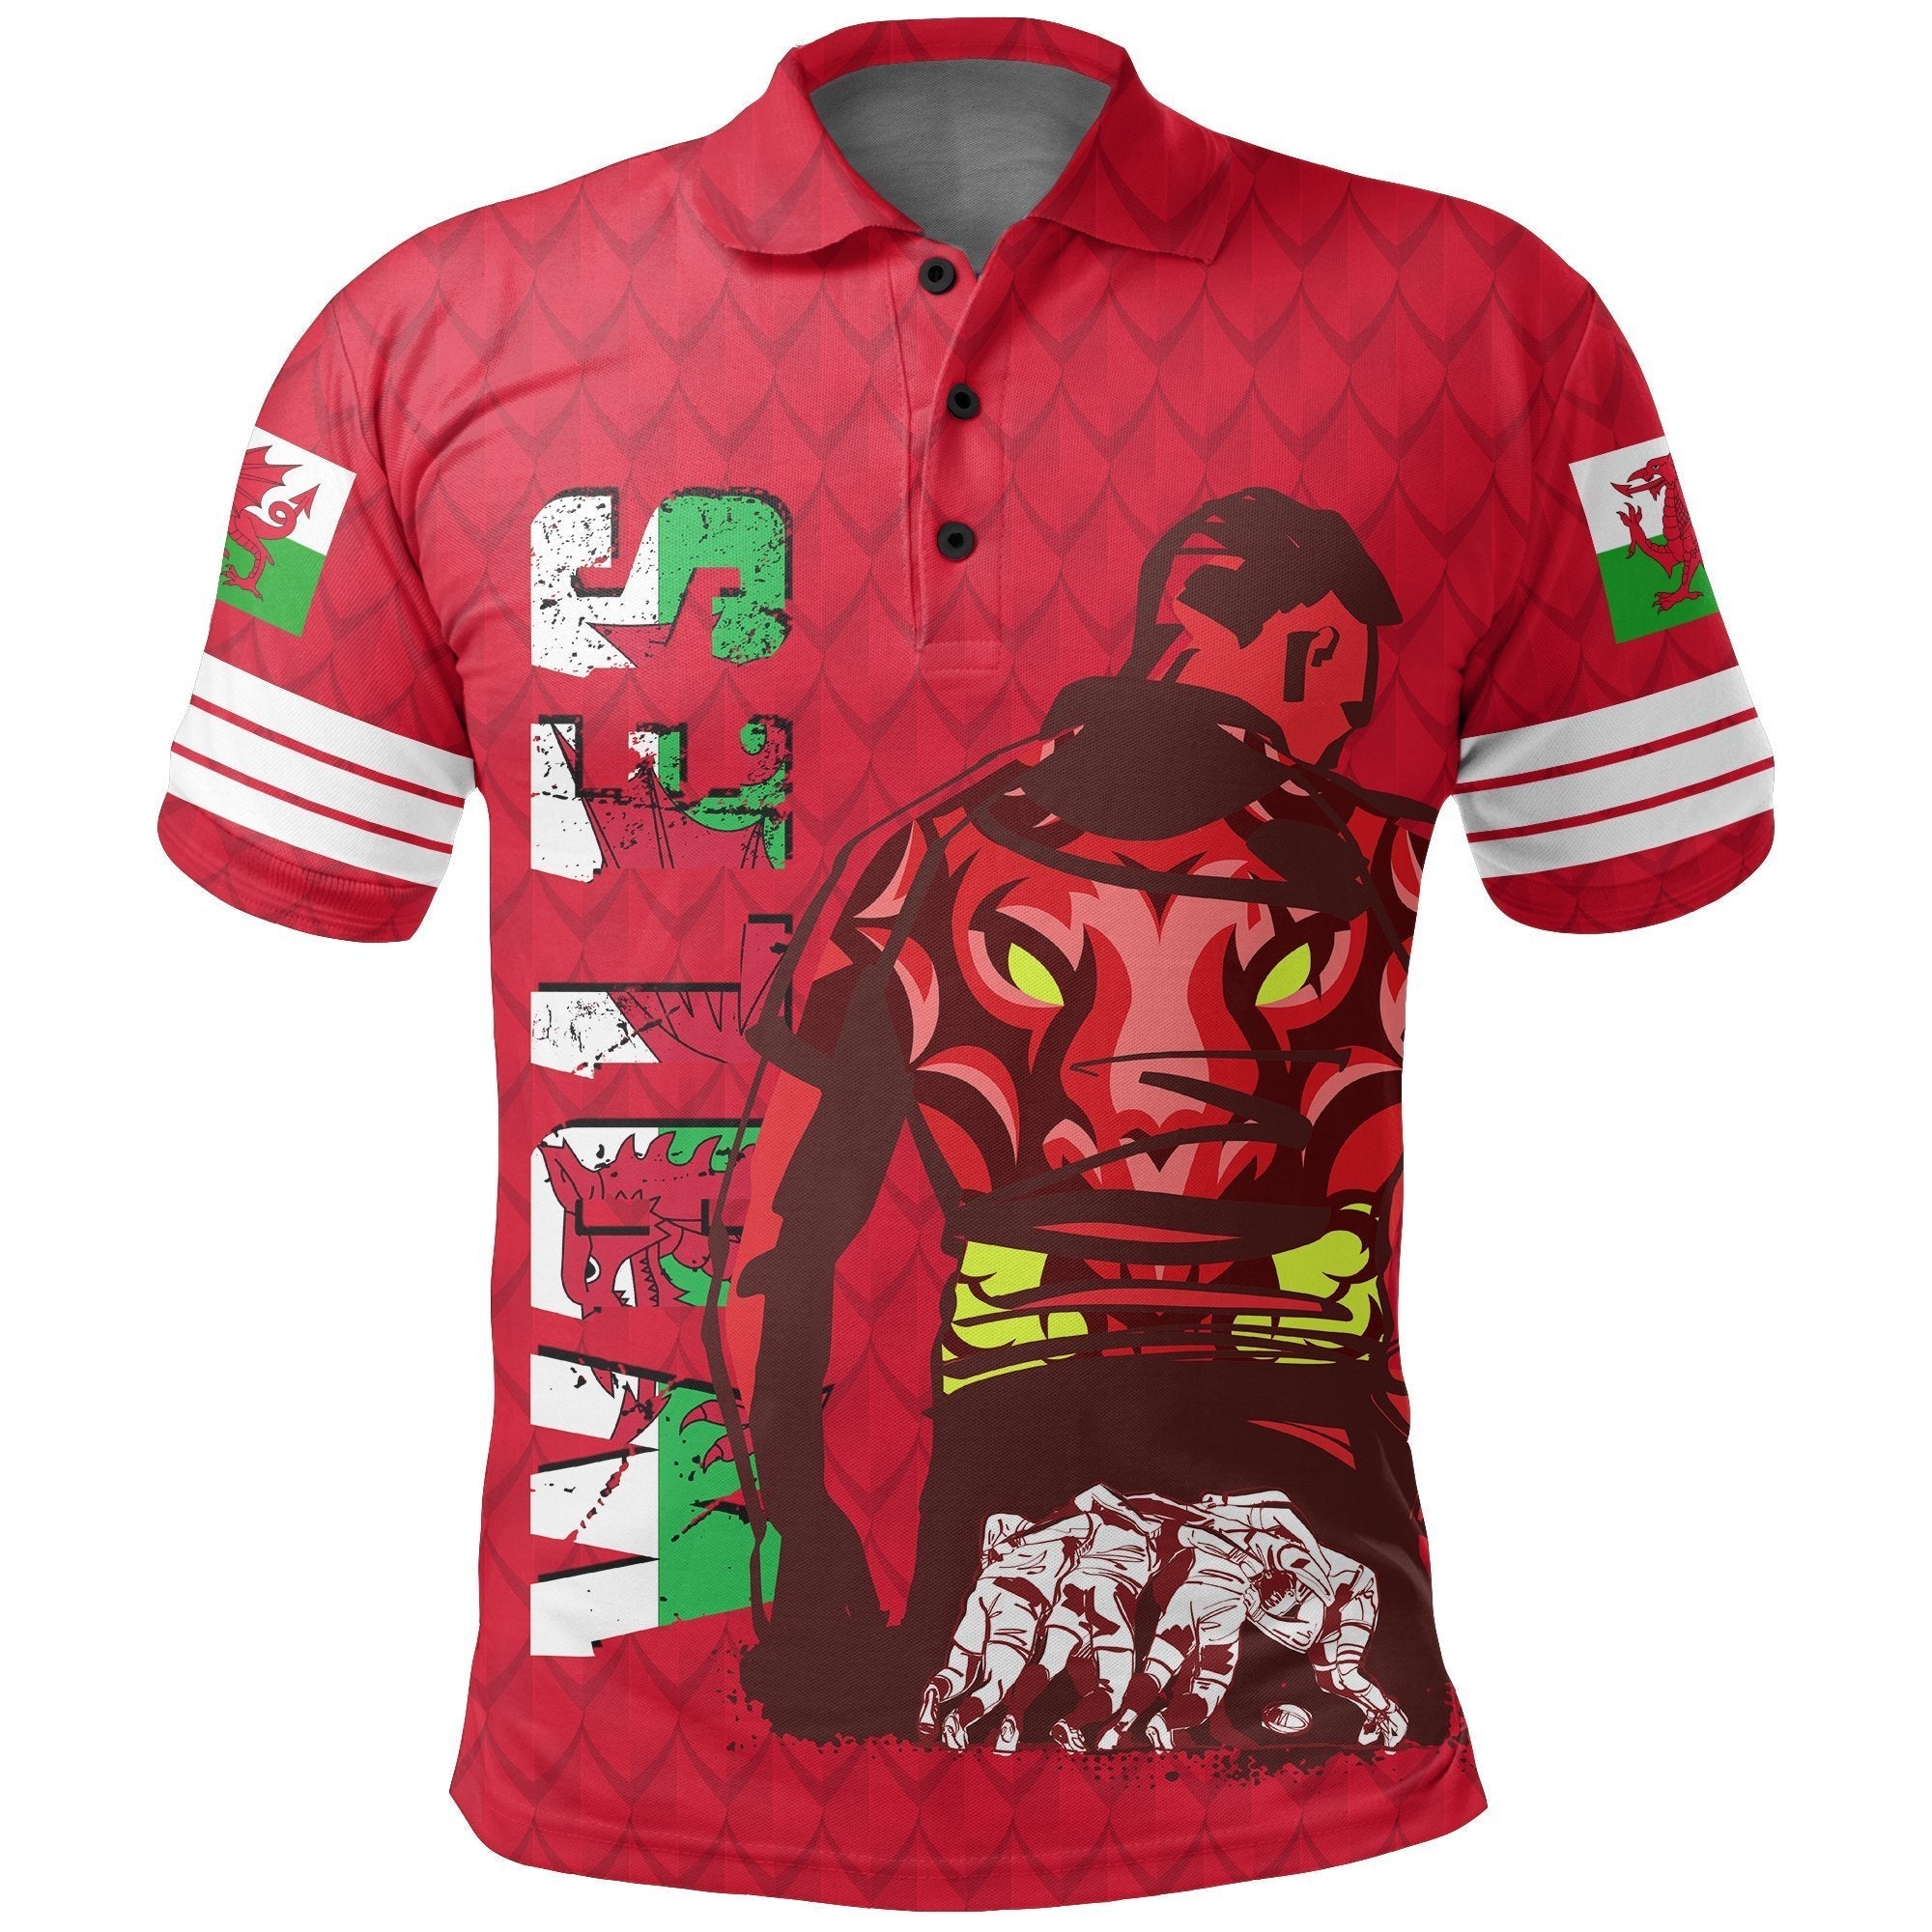 wales-flag-polo-shirt-rugby-winner